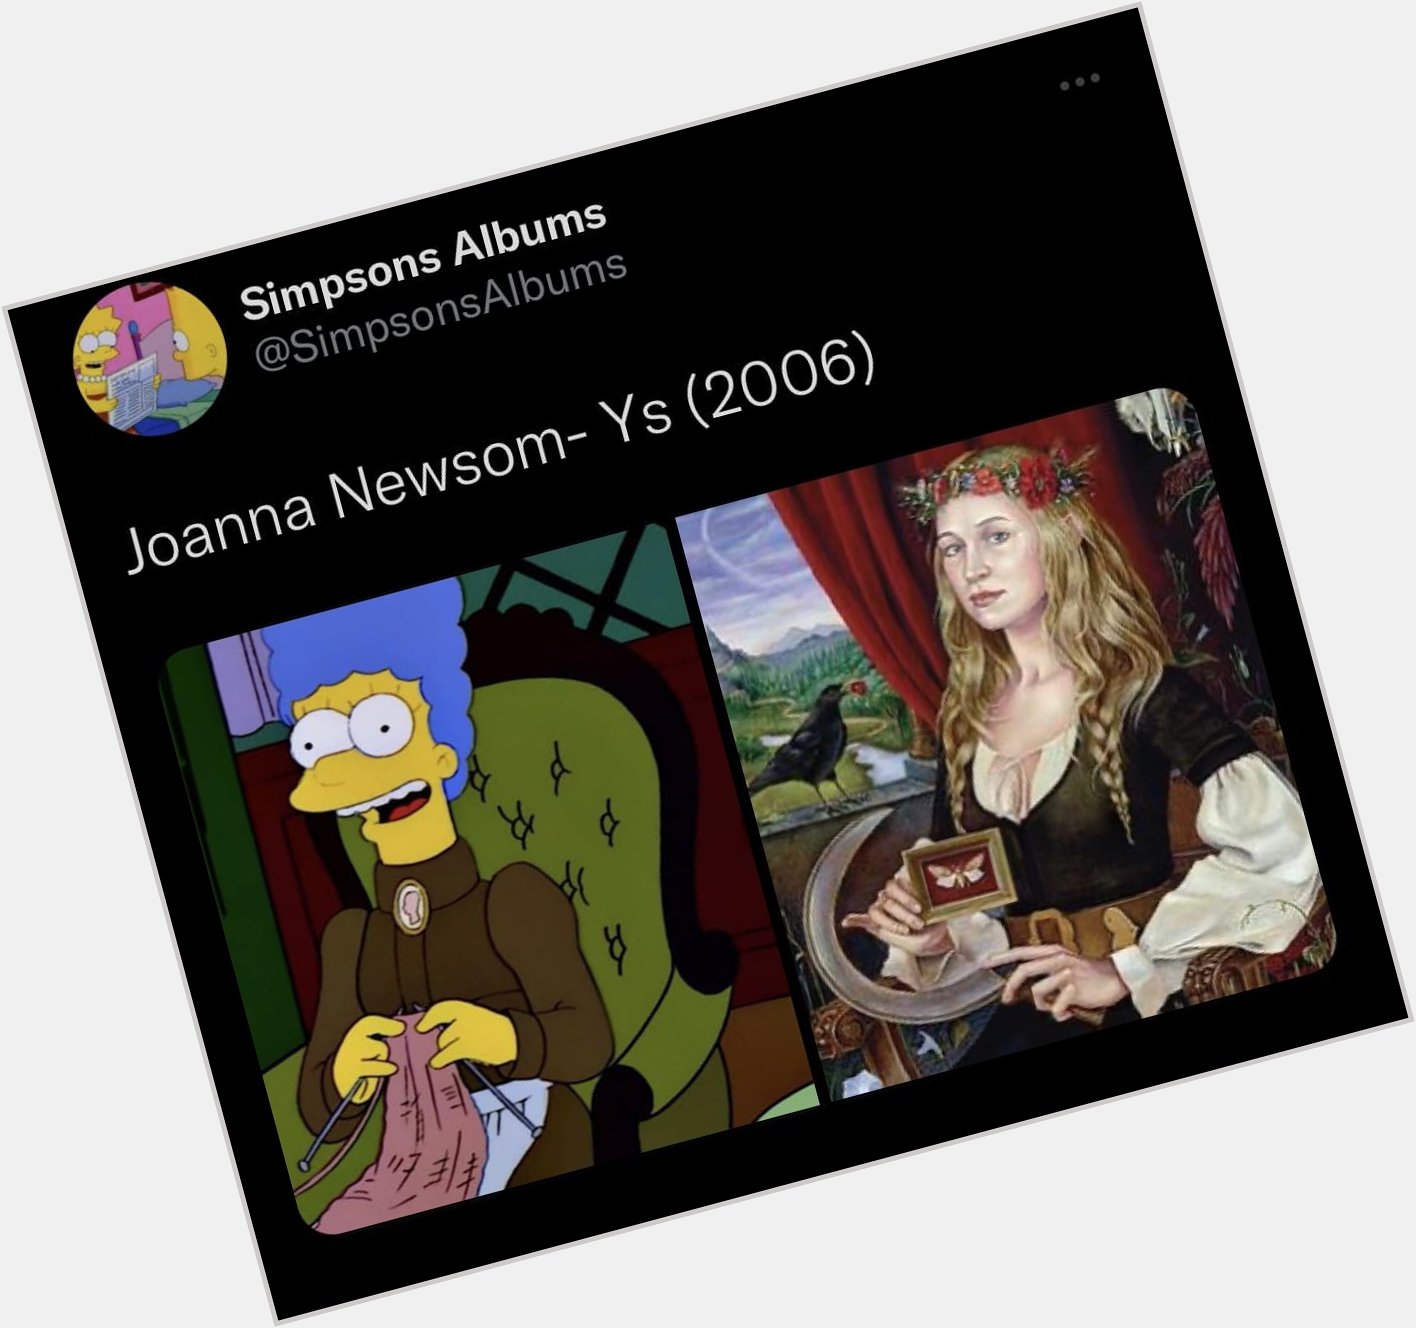 So that\s why i had a craving to listen to ys this morning, it\s The Queen\s birthday. happy birthday joanna newsom! 